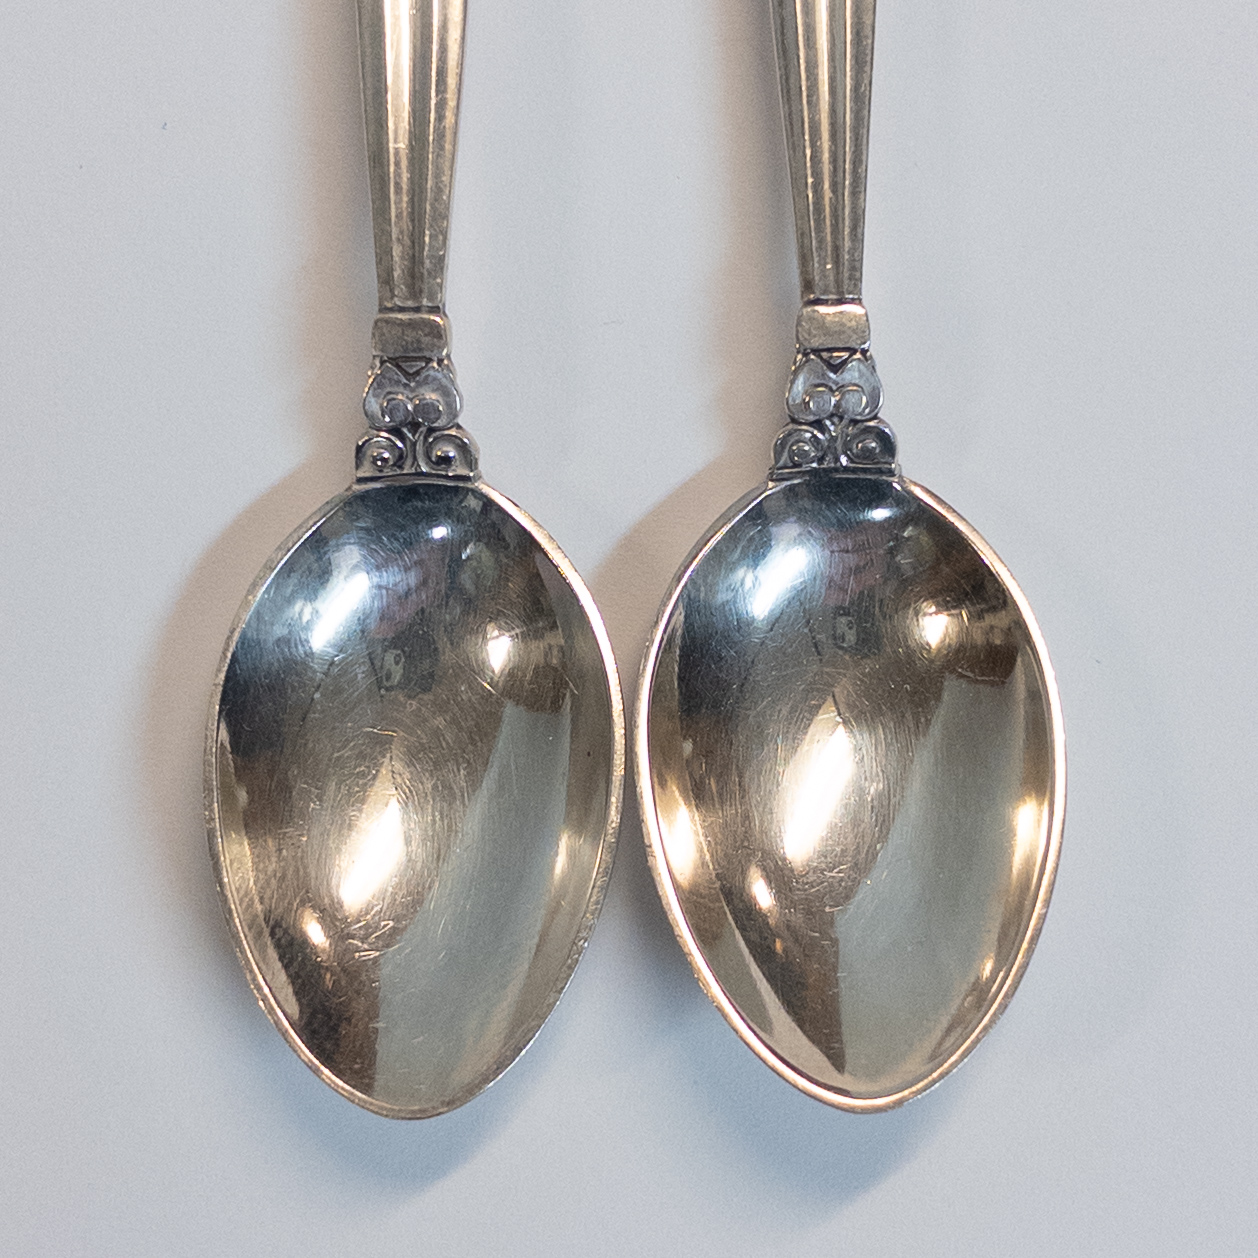 Georg Jensen Sterling Silver Set of 12 Condiment Spoons